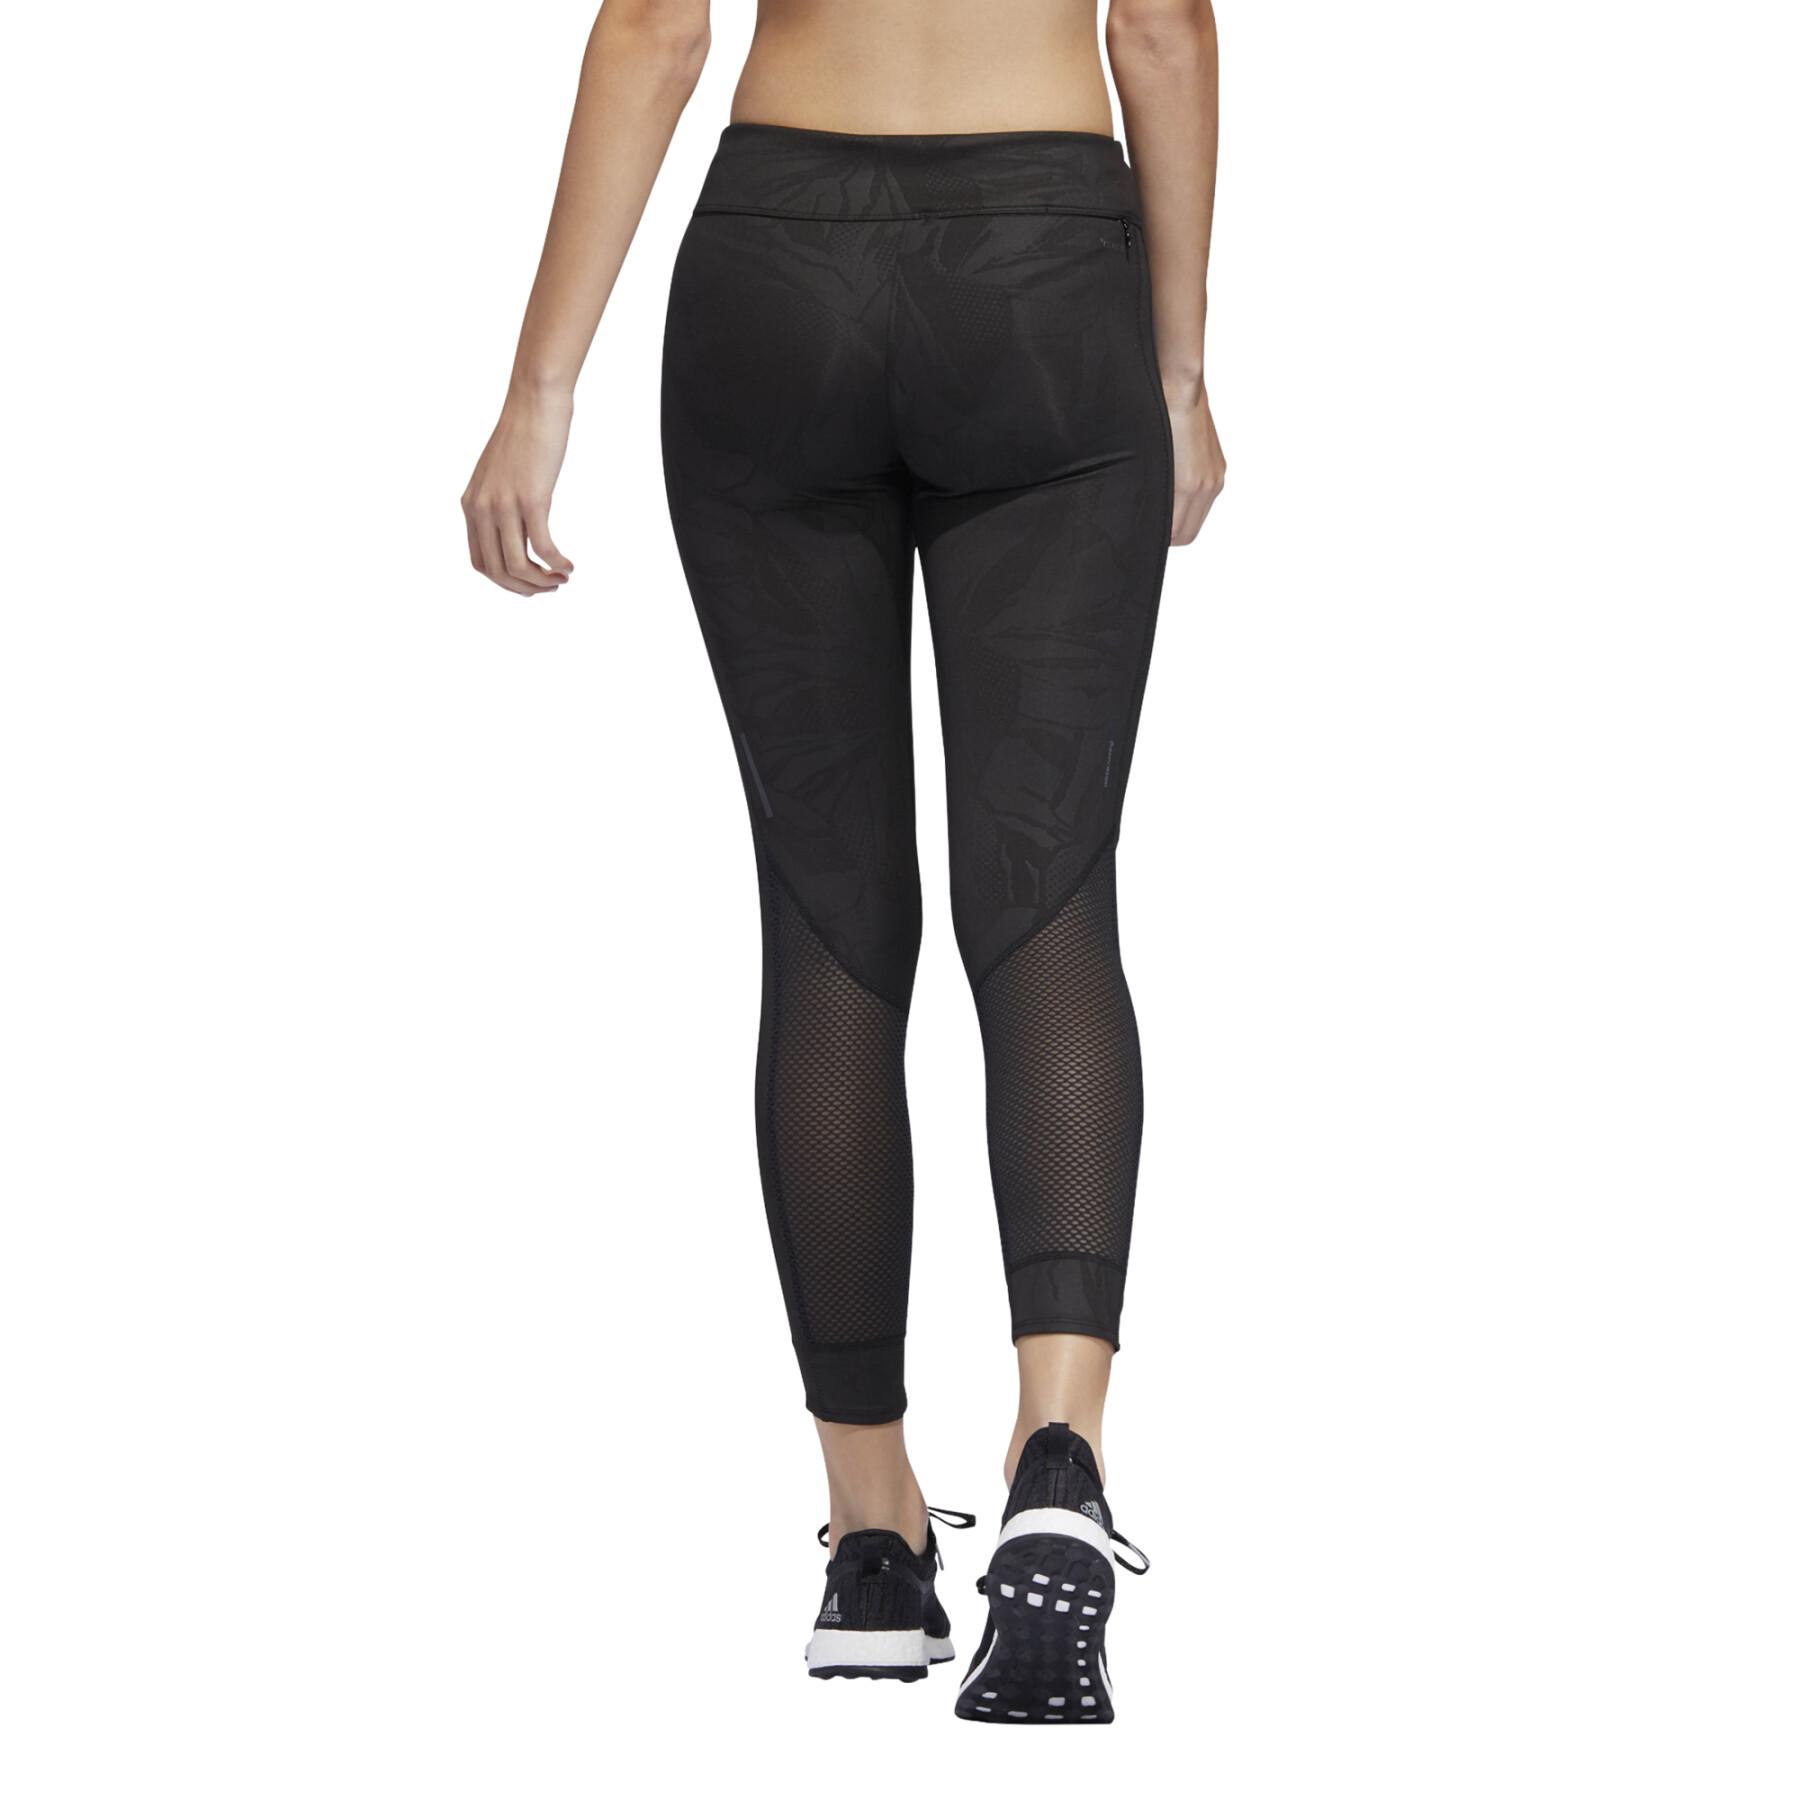 Legging mujer adidas 7/8 Own the Run Paper Floral